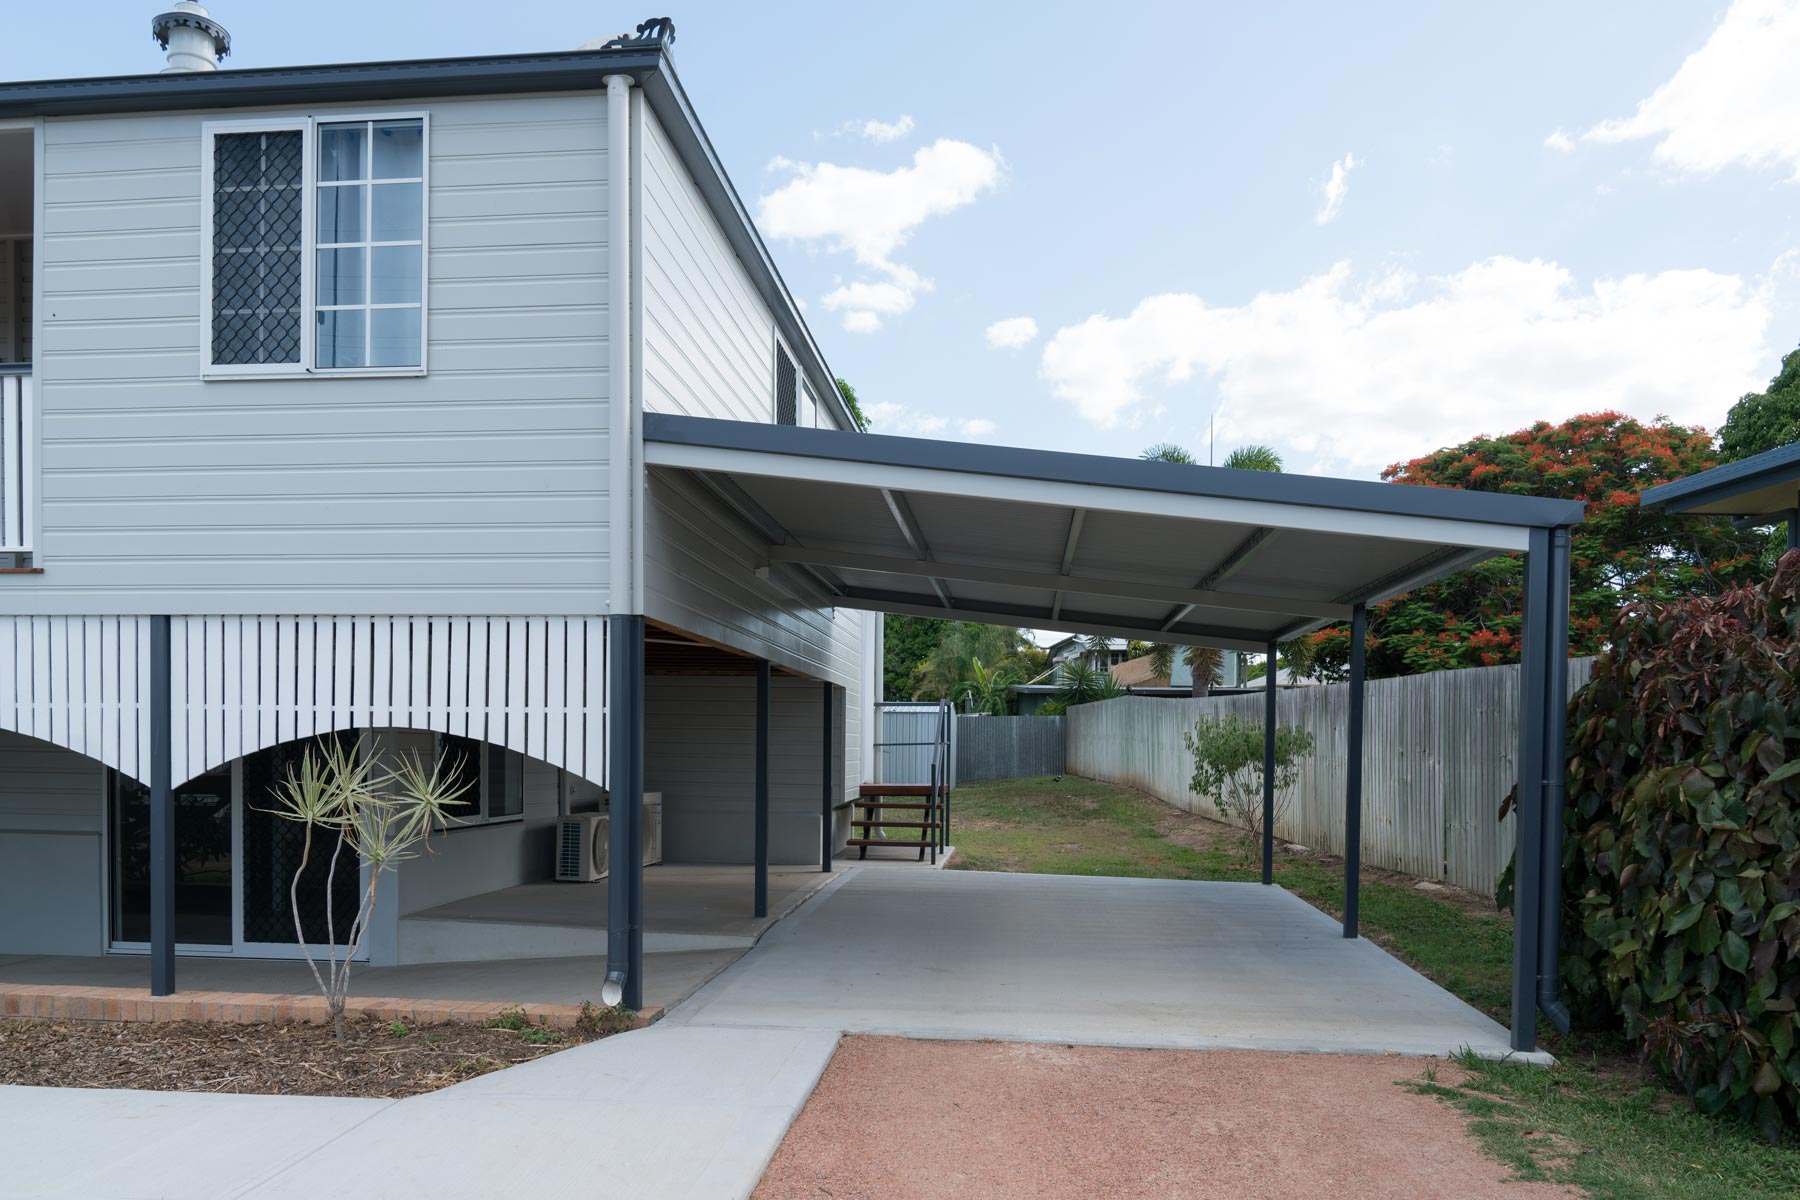 A carport with a metal roof